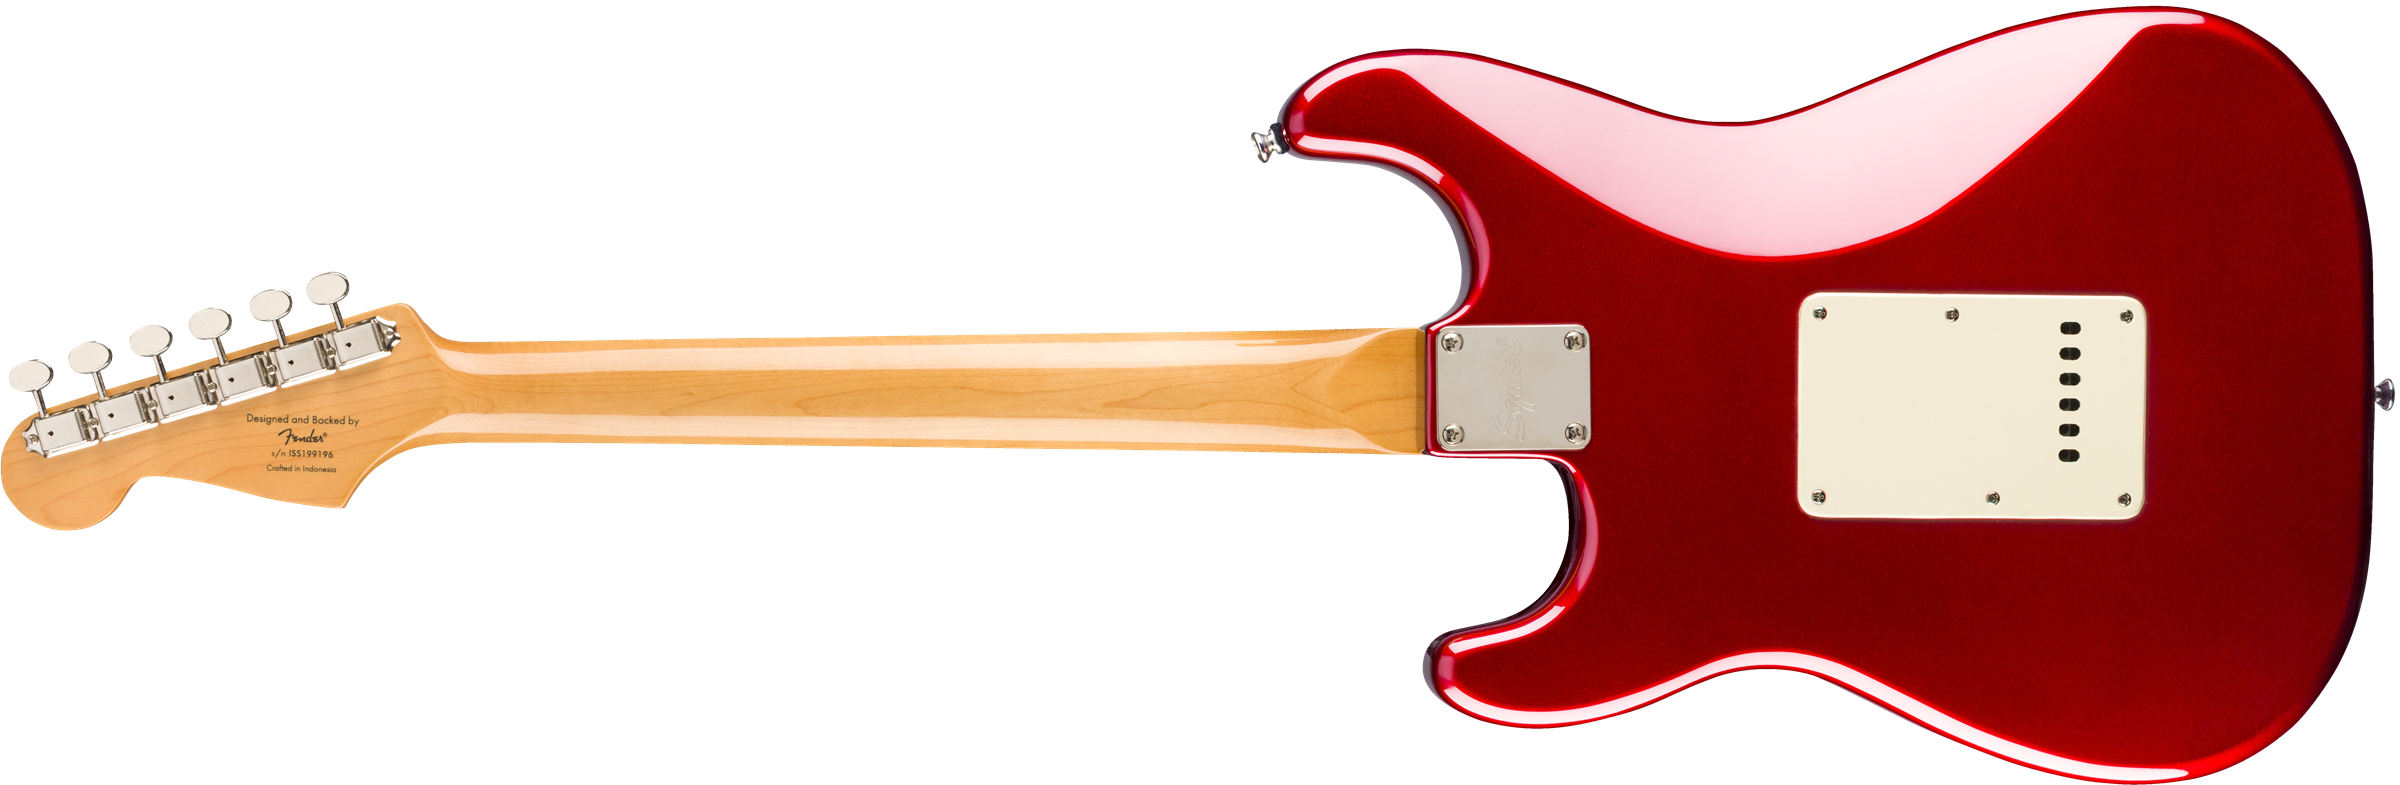 Squier Strat '60s Classic Vibe 2019 Lau 2019 - Candy Apple Red - Str shape electric guitar - Variation 1